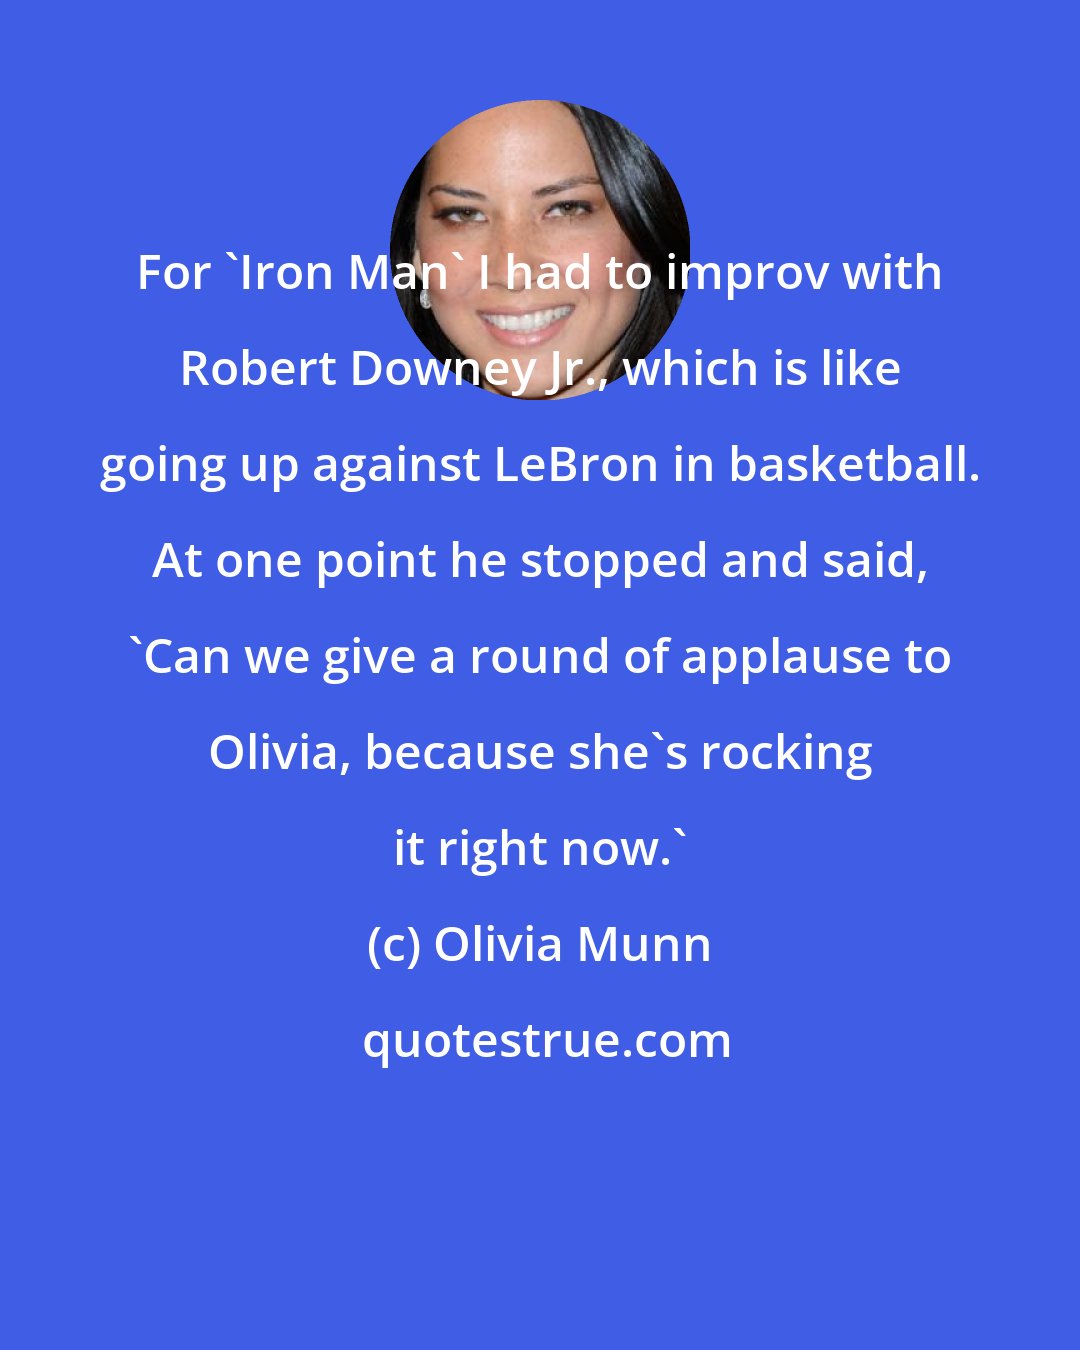 Olivia Munn: For 'Iron Man' I had to improv with Robert Downey Jr., which is like going up against LeBron in basketball. At one point he stopped and said, 'Can we give a round of applause to Olivia, because she's rocking it right now.'